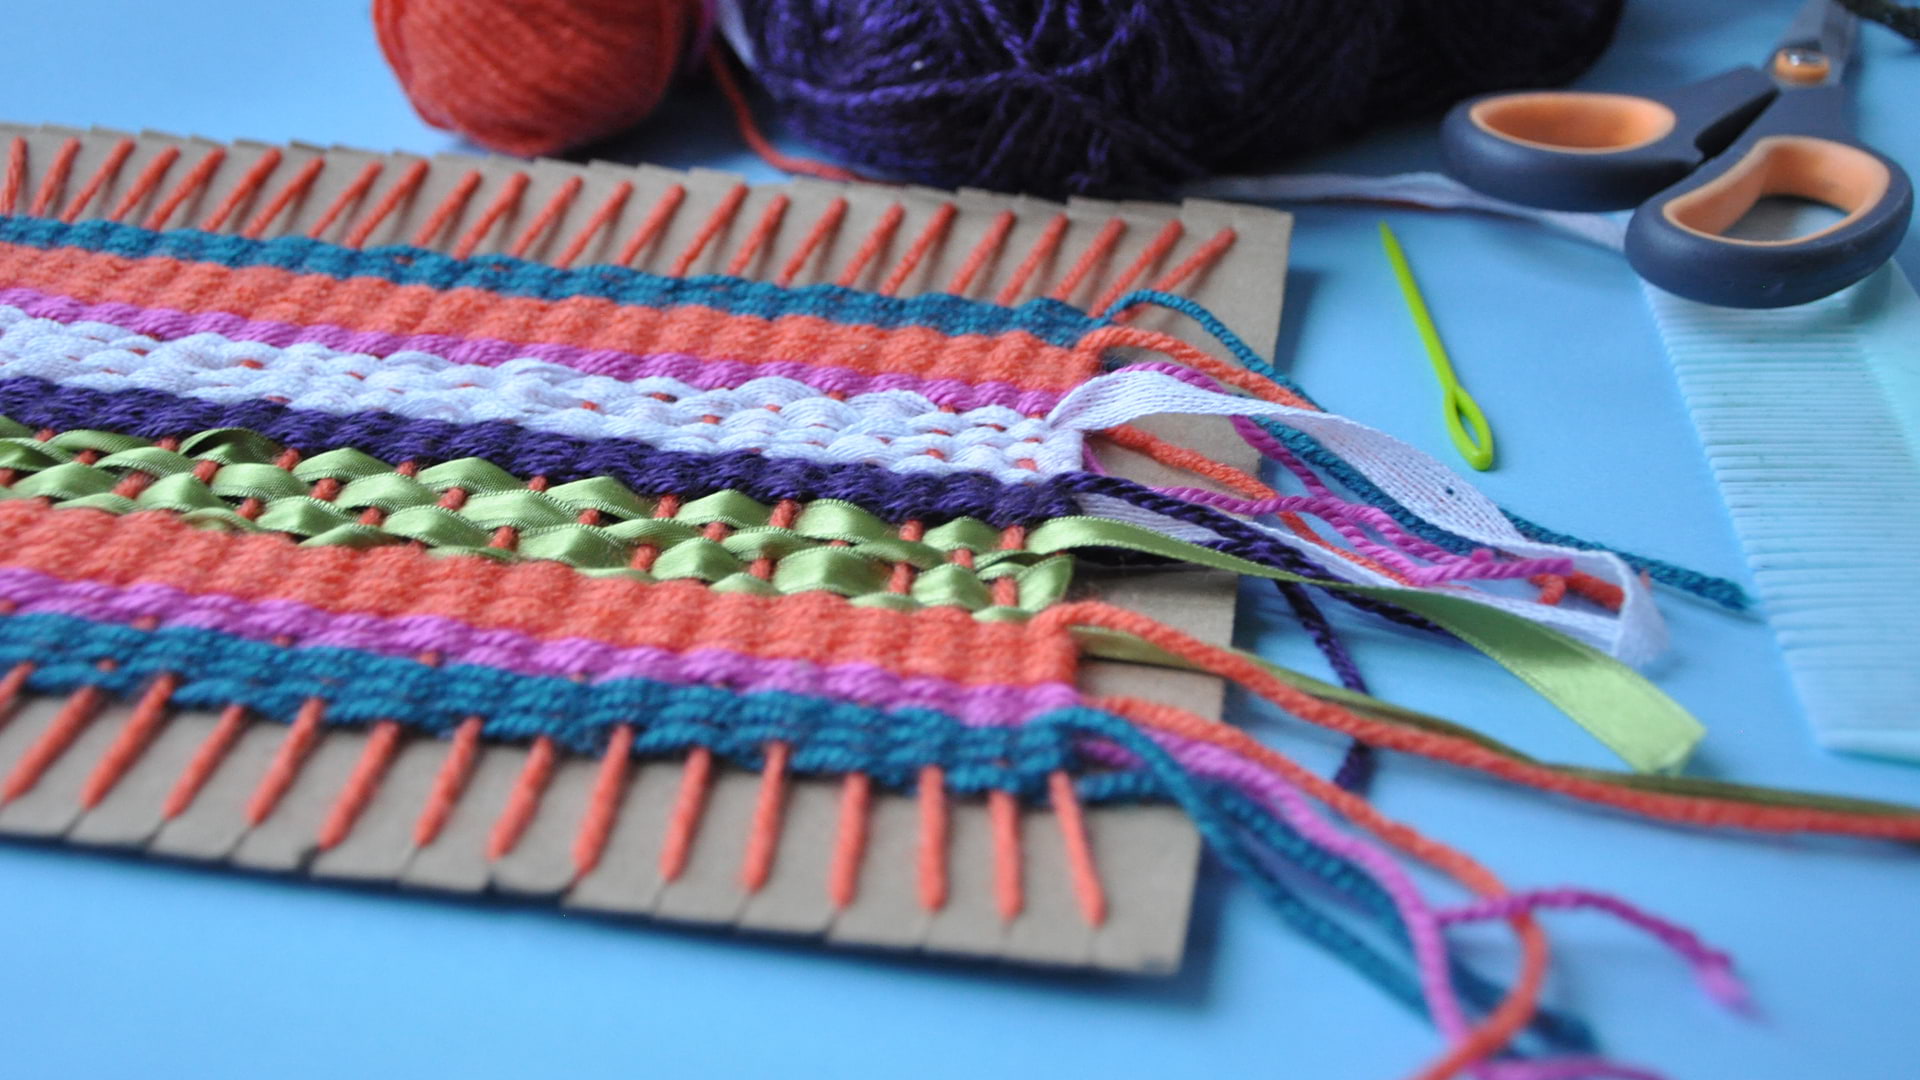 Weaving with Colorful Fabric slide 2